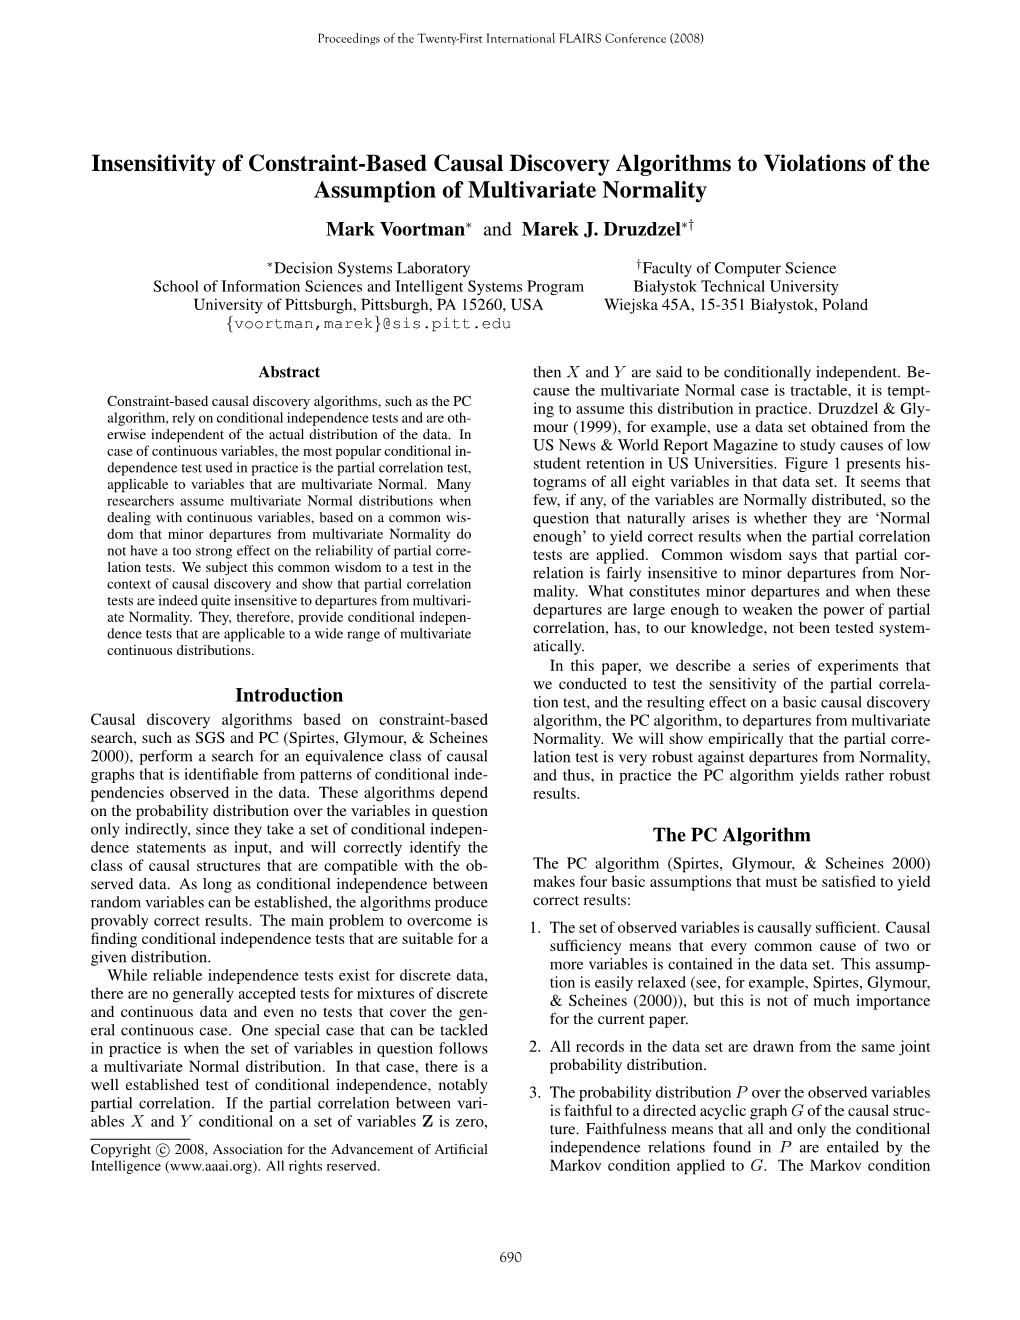 Insensitivity of Constraint-Based Causal Discovery Algorithms to Violations of the Assumption of Multivariate Normality Mark Voortman∗ and Marek J